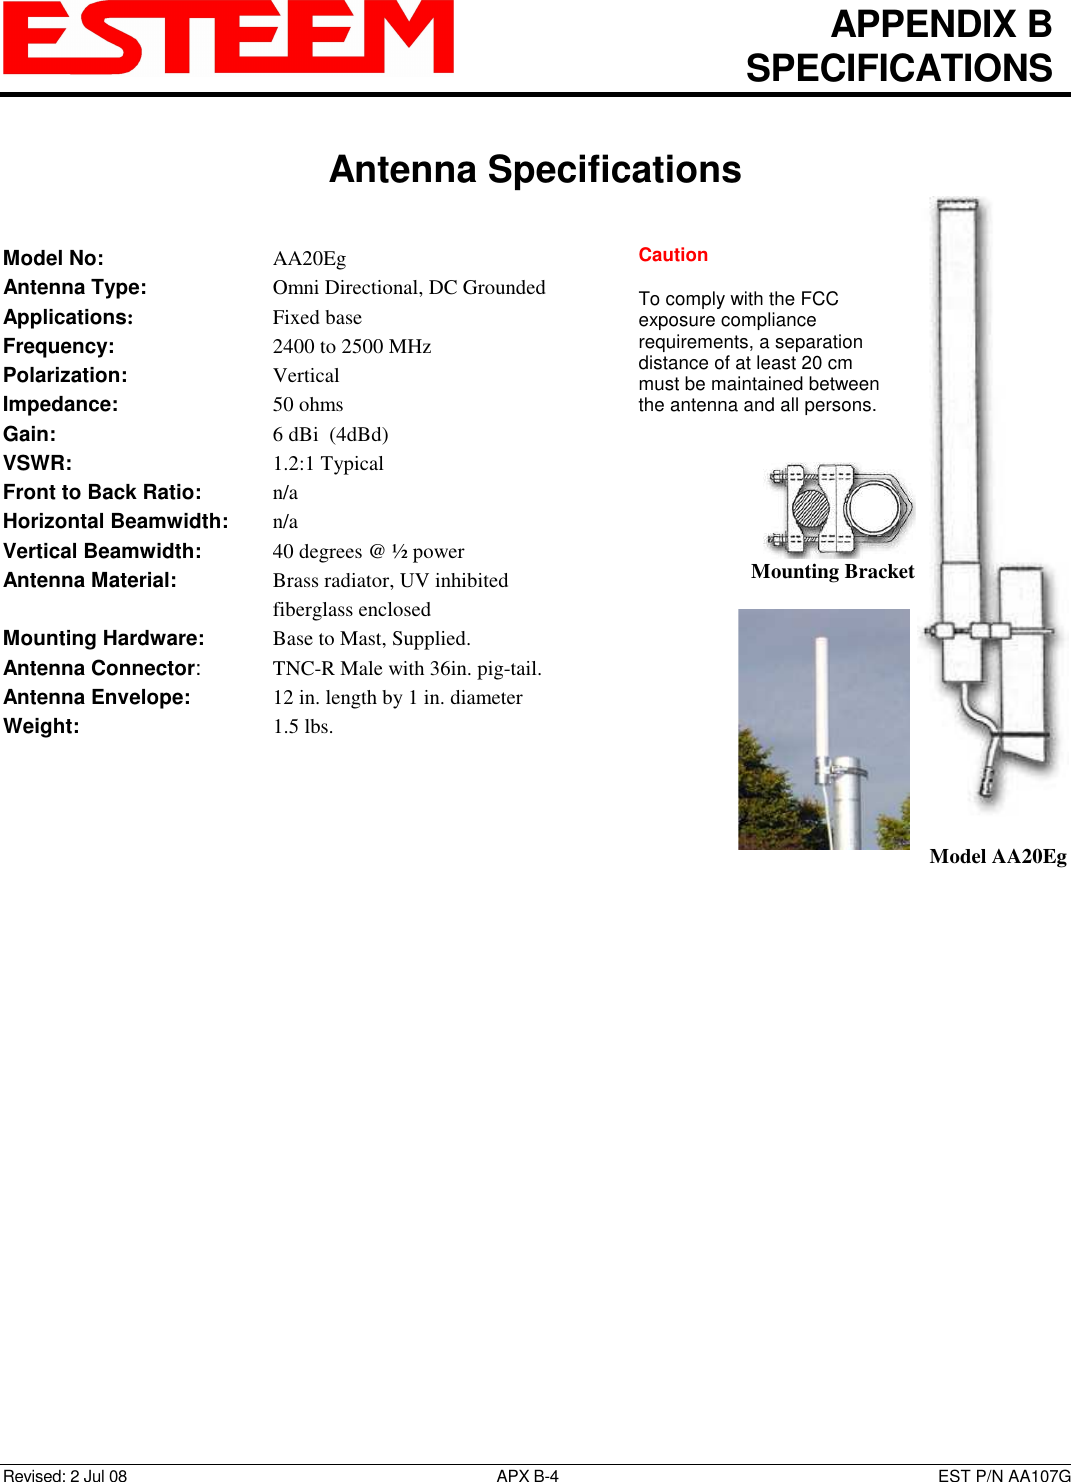   APPENDIX B   SPECIFICATIONS   Antenna Specifications   Revised: 2 Jul 08  APX B-4  EST P/N AA107G Model No:        AA20Eg Antenna Type:      Omni Directional, DC Grounded Applications:       Fixed base Frequency:        2400 to 2500 MHz  Polarization:        Vertical Impedance:        50 ohms Gain:          6 dBi  (4dBd) VSWR:          1.2:1 Typical  Front to Back Ratio:    n/a Horizontal Beamwidth:  n/a Vertical Beamwidth:      40 degrees @ ½ power Antenna Material:     Brass radiator, UV inhibited fiberglass enclosed  Mounting Hardware:      Base to Mast, Supplied.  Antenna Connector:    TNC-R Male with 36in. pig-tail. Antenna Envelope:    12 in. length by 1 in. diameter Weight:           1.5 lbs.    Mounting Bracket    Model AA20Eg Caution  To comply with the FCC exposure compliance requirements, a separation distance of at least 20 cm must be maintained between the antenna and all persons.  